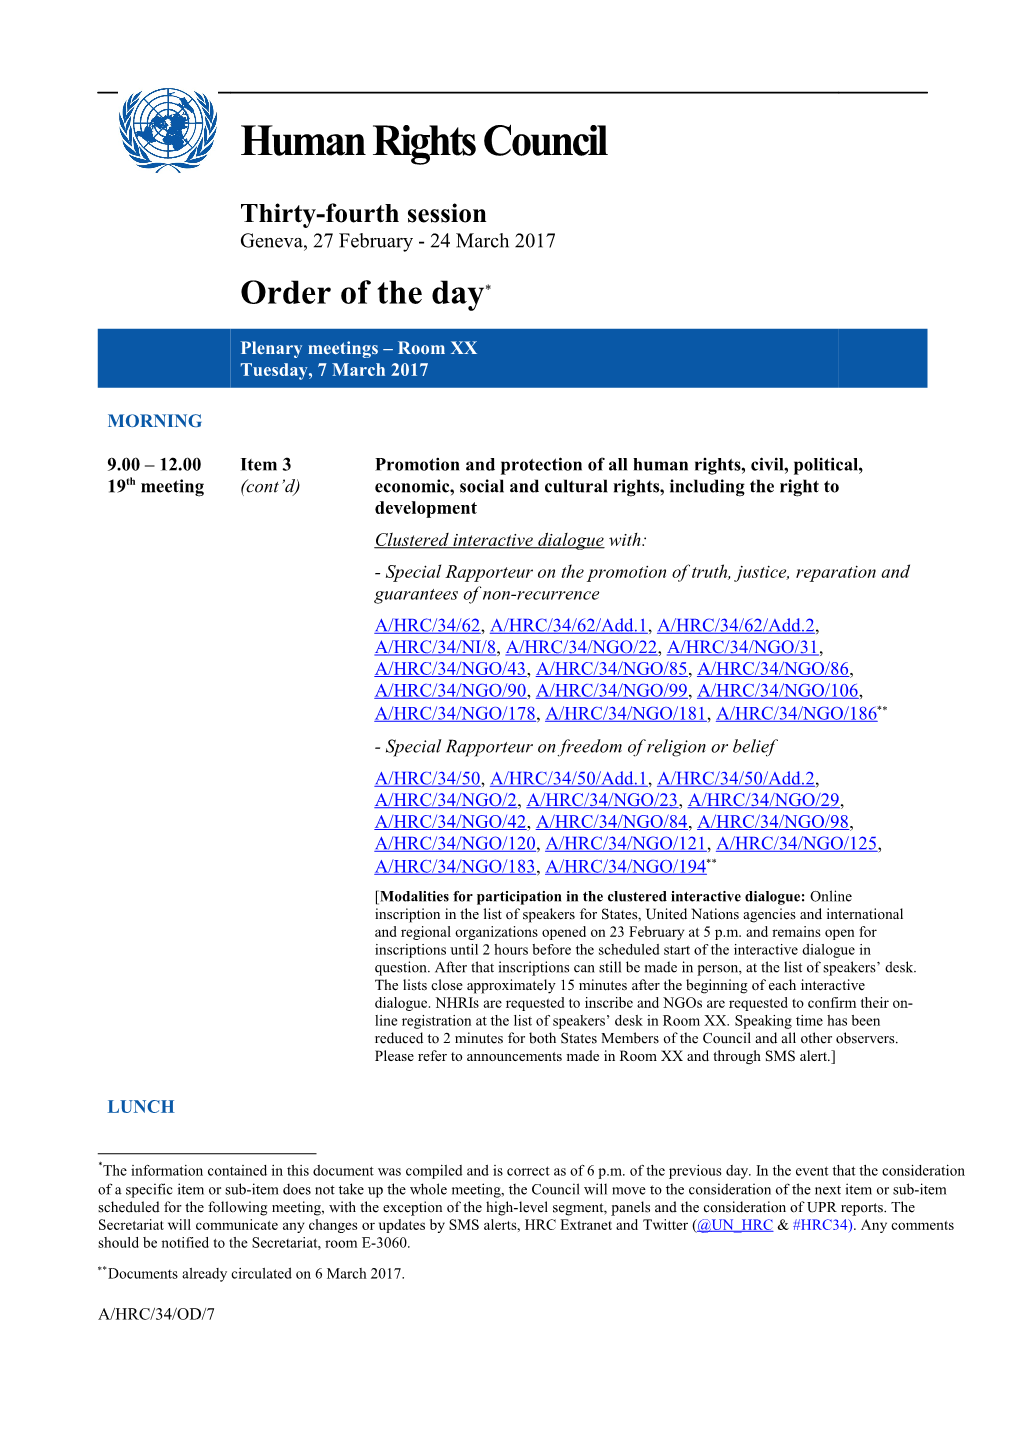 Order of the Day, Tuesday 7 March 2017